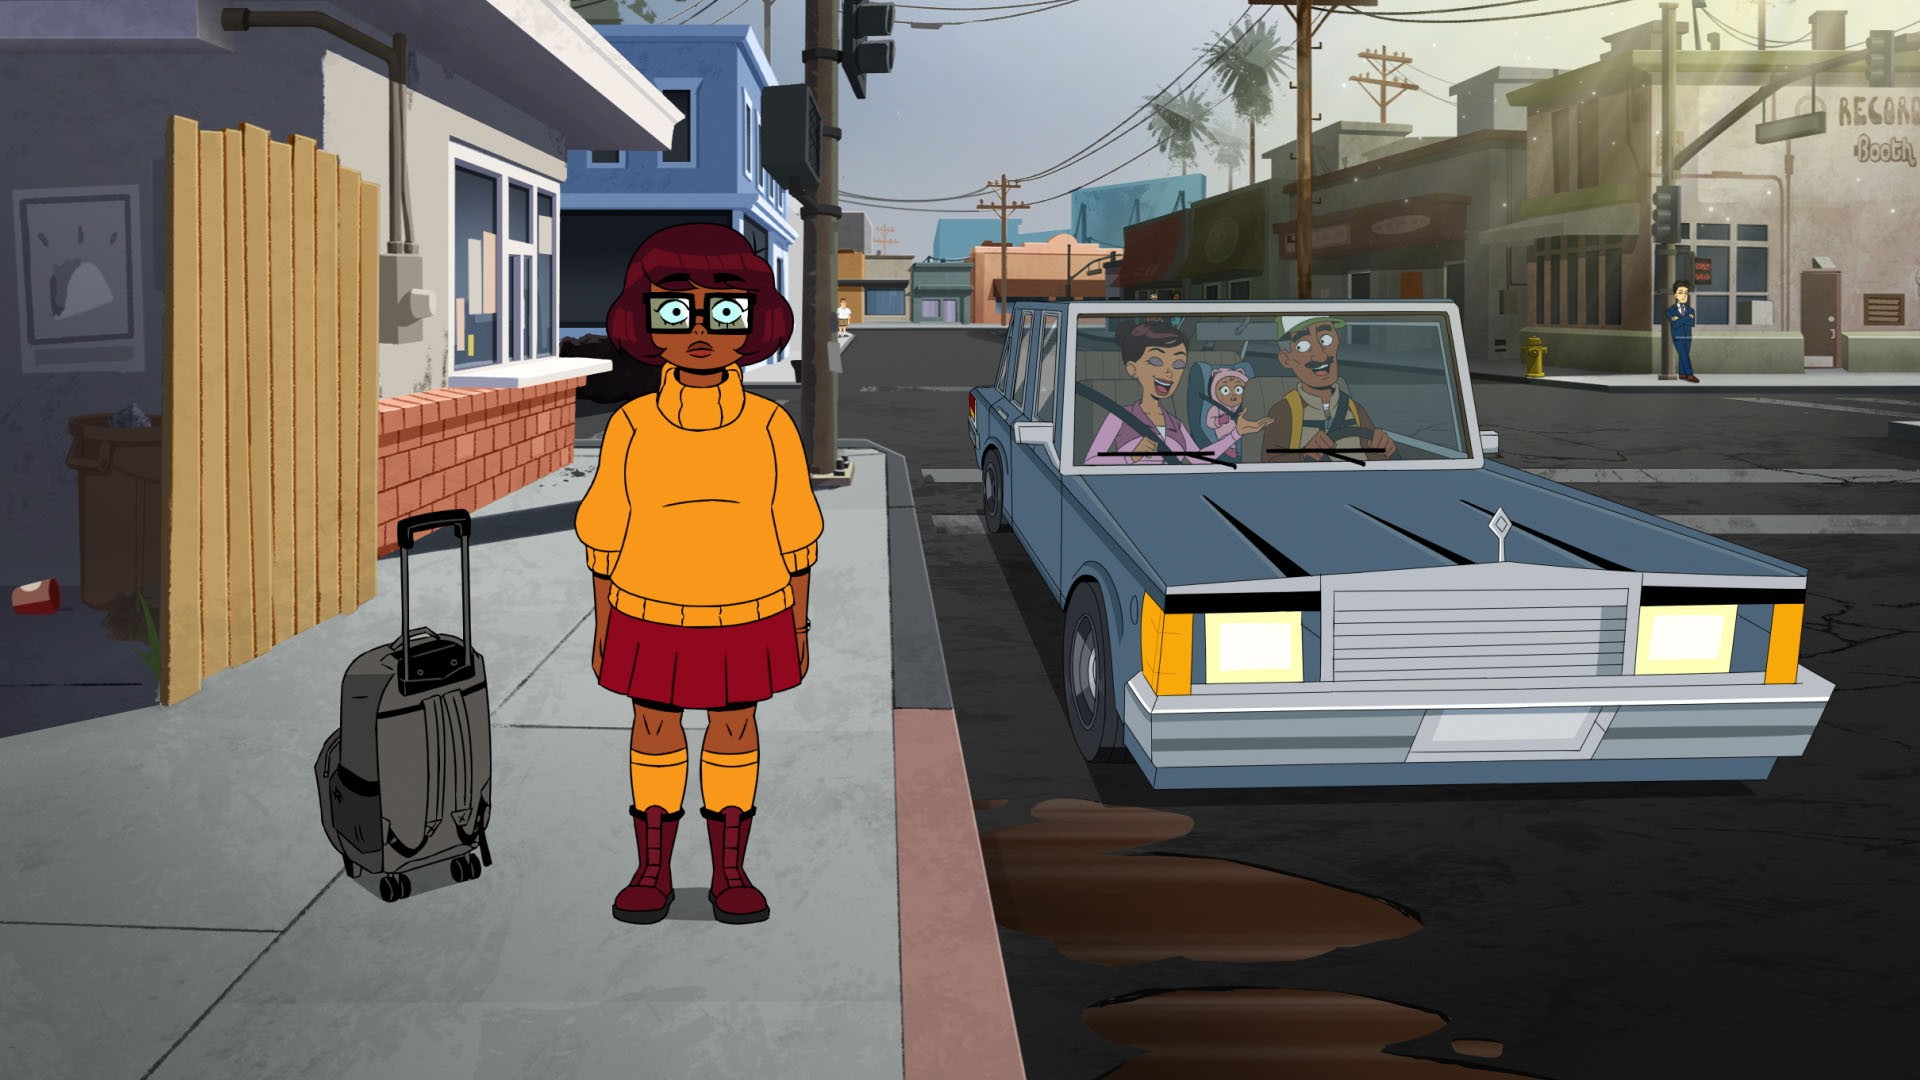 Velma' had the biggest premiere day for a HBO Max animated series ever  despite having a 15% audience score on Rotten Tomatoes.